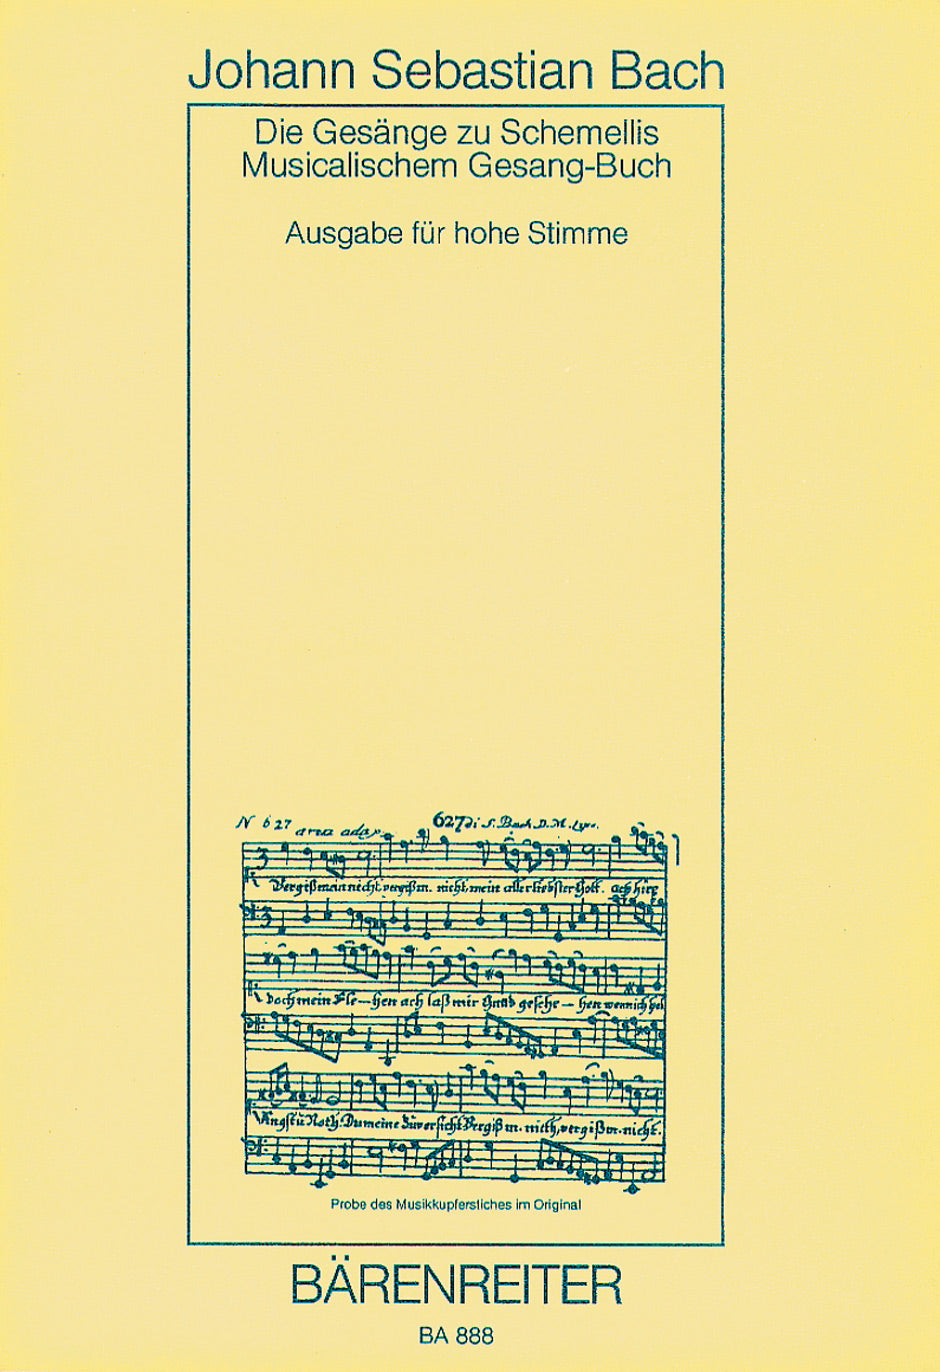 Schemelli Song Book 1736 & 6 Lieder from the Notebook for Anna Magdalena, BWV 439-507, Nos. 511-514, 516, 517